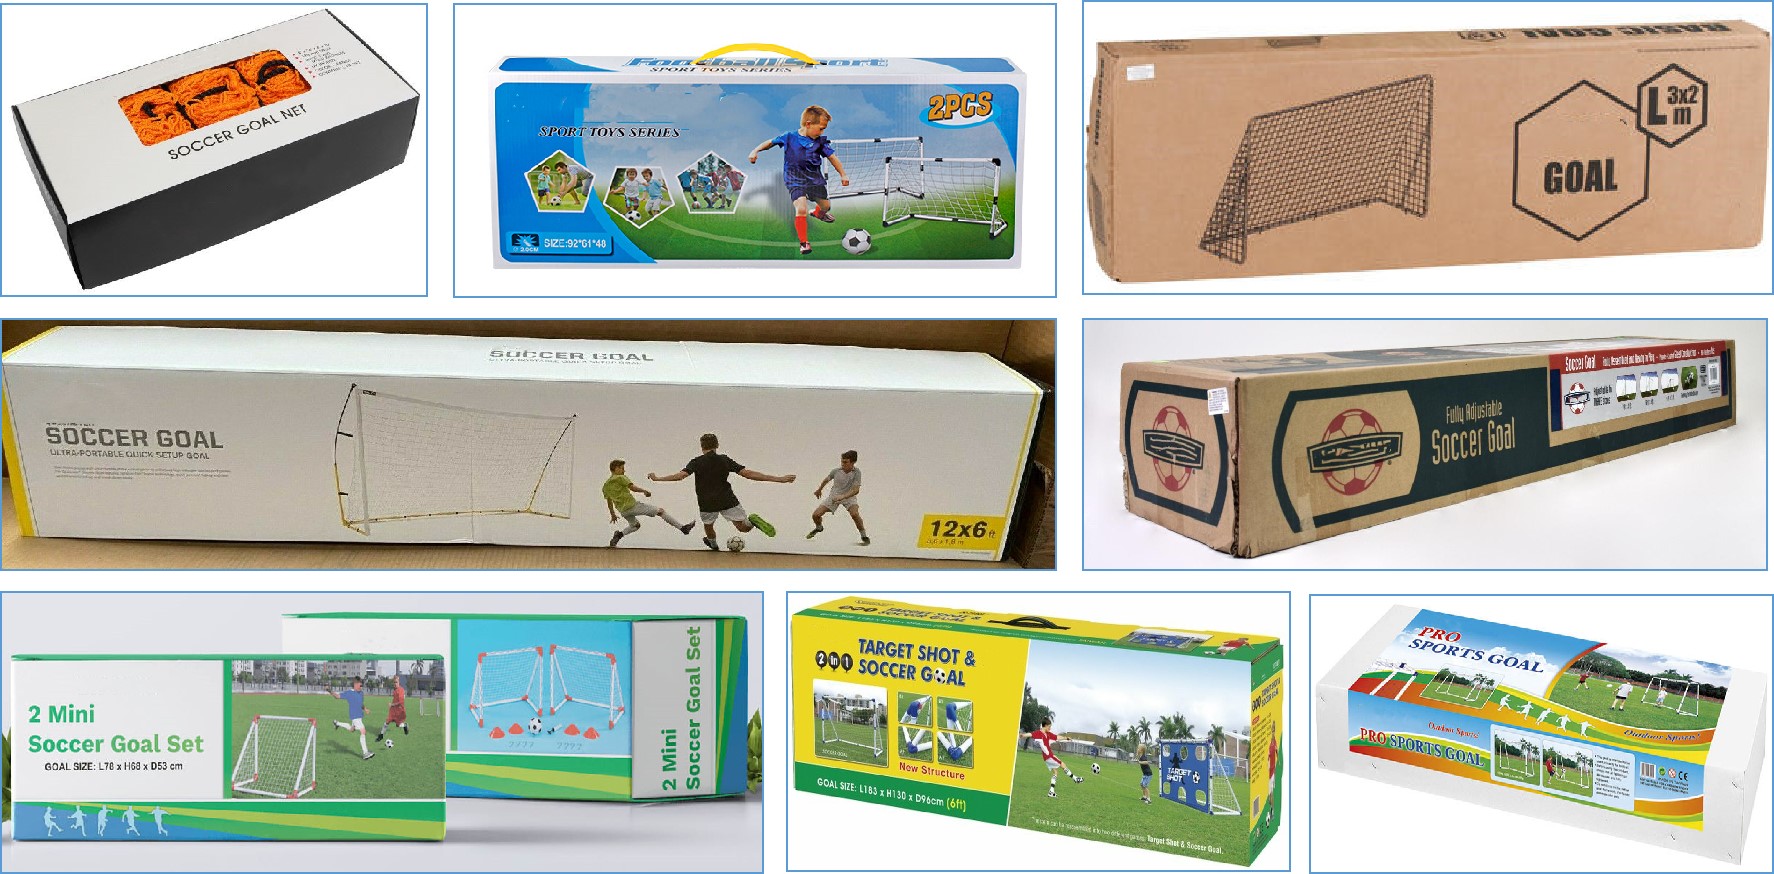  Portable Volleyball Net 